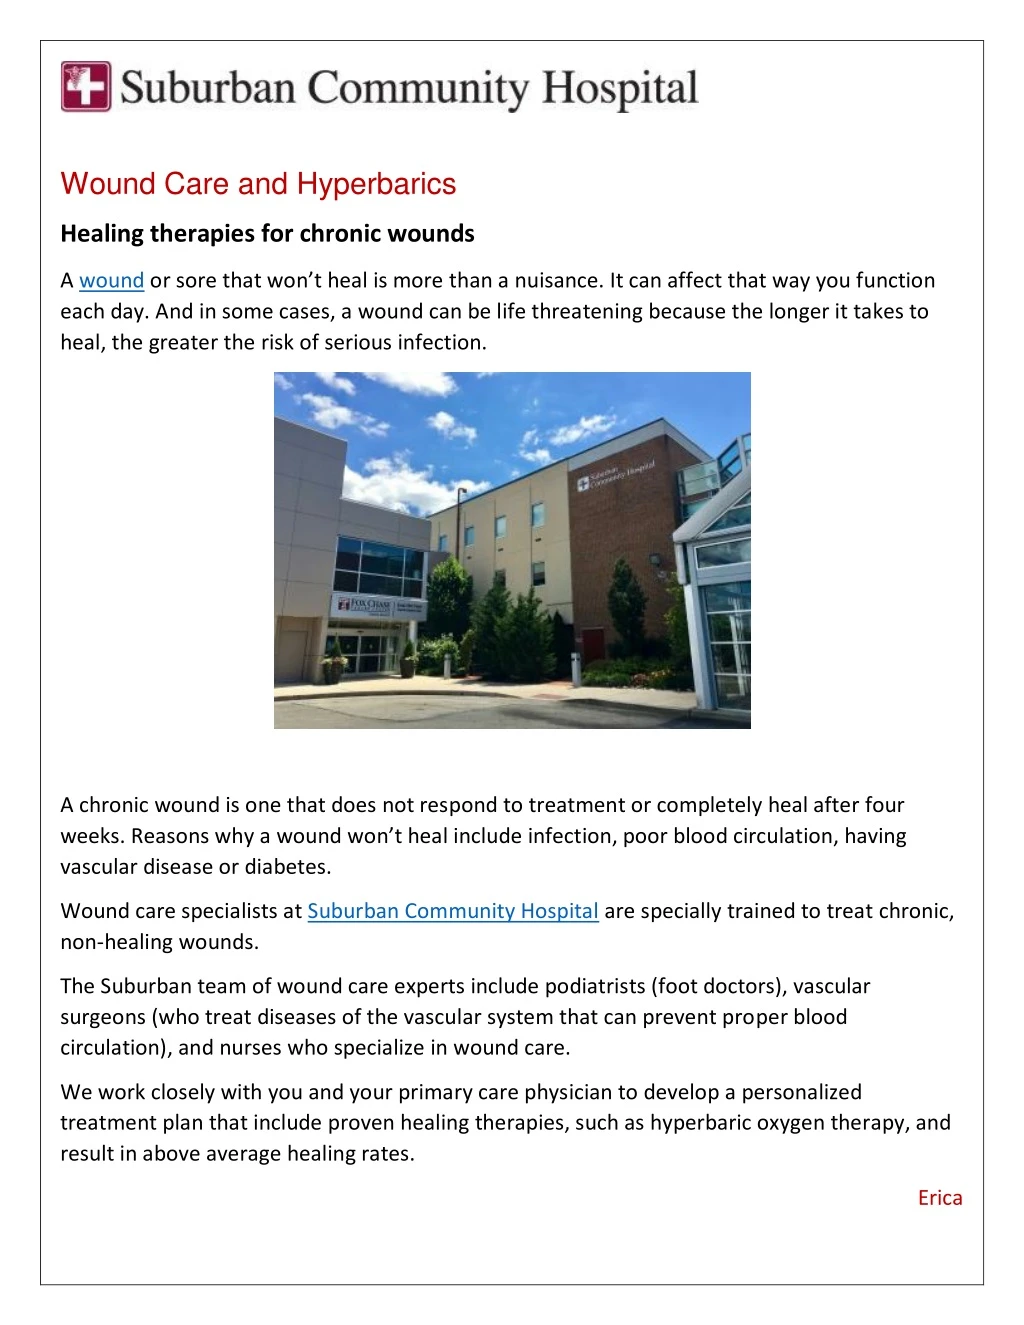 wound care and hyperbarics